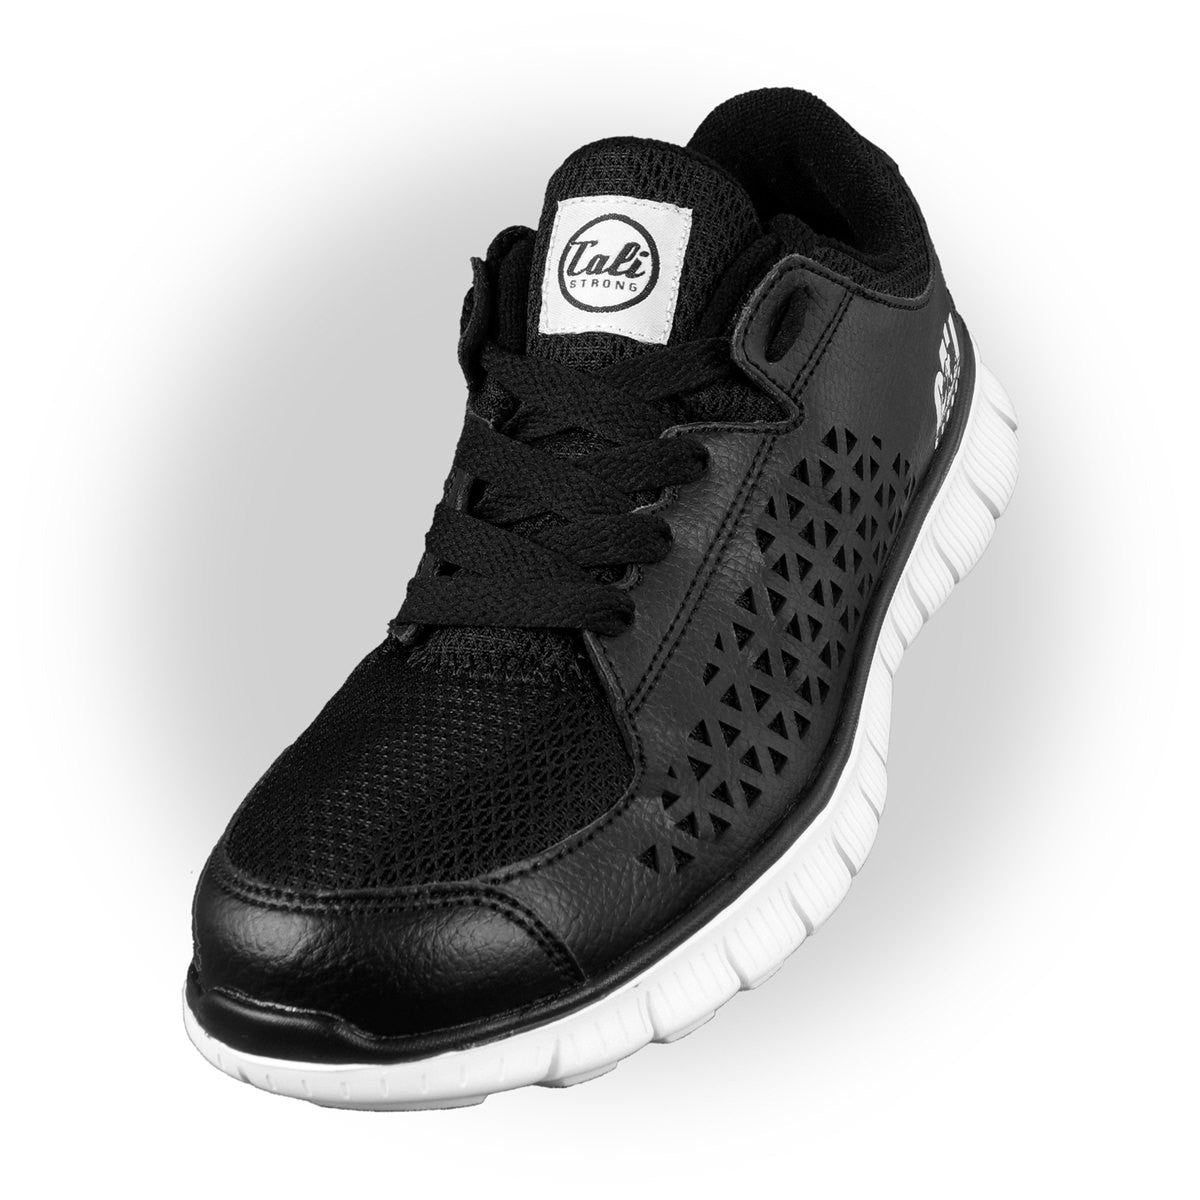 CALI Strong Diego Running Shoe Black White - Shoes - Image 2 - CALI Strong